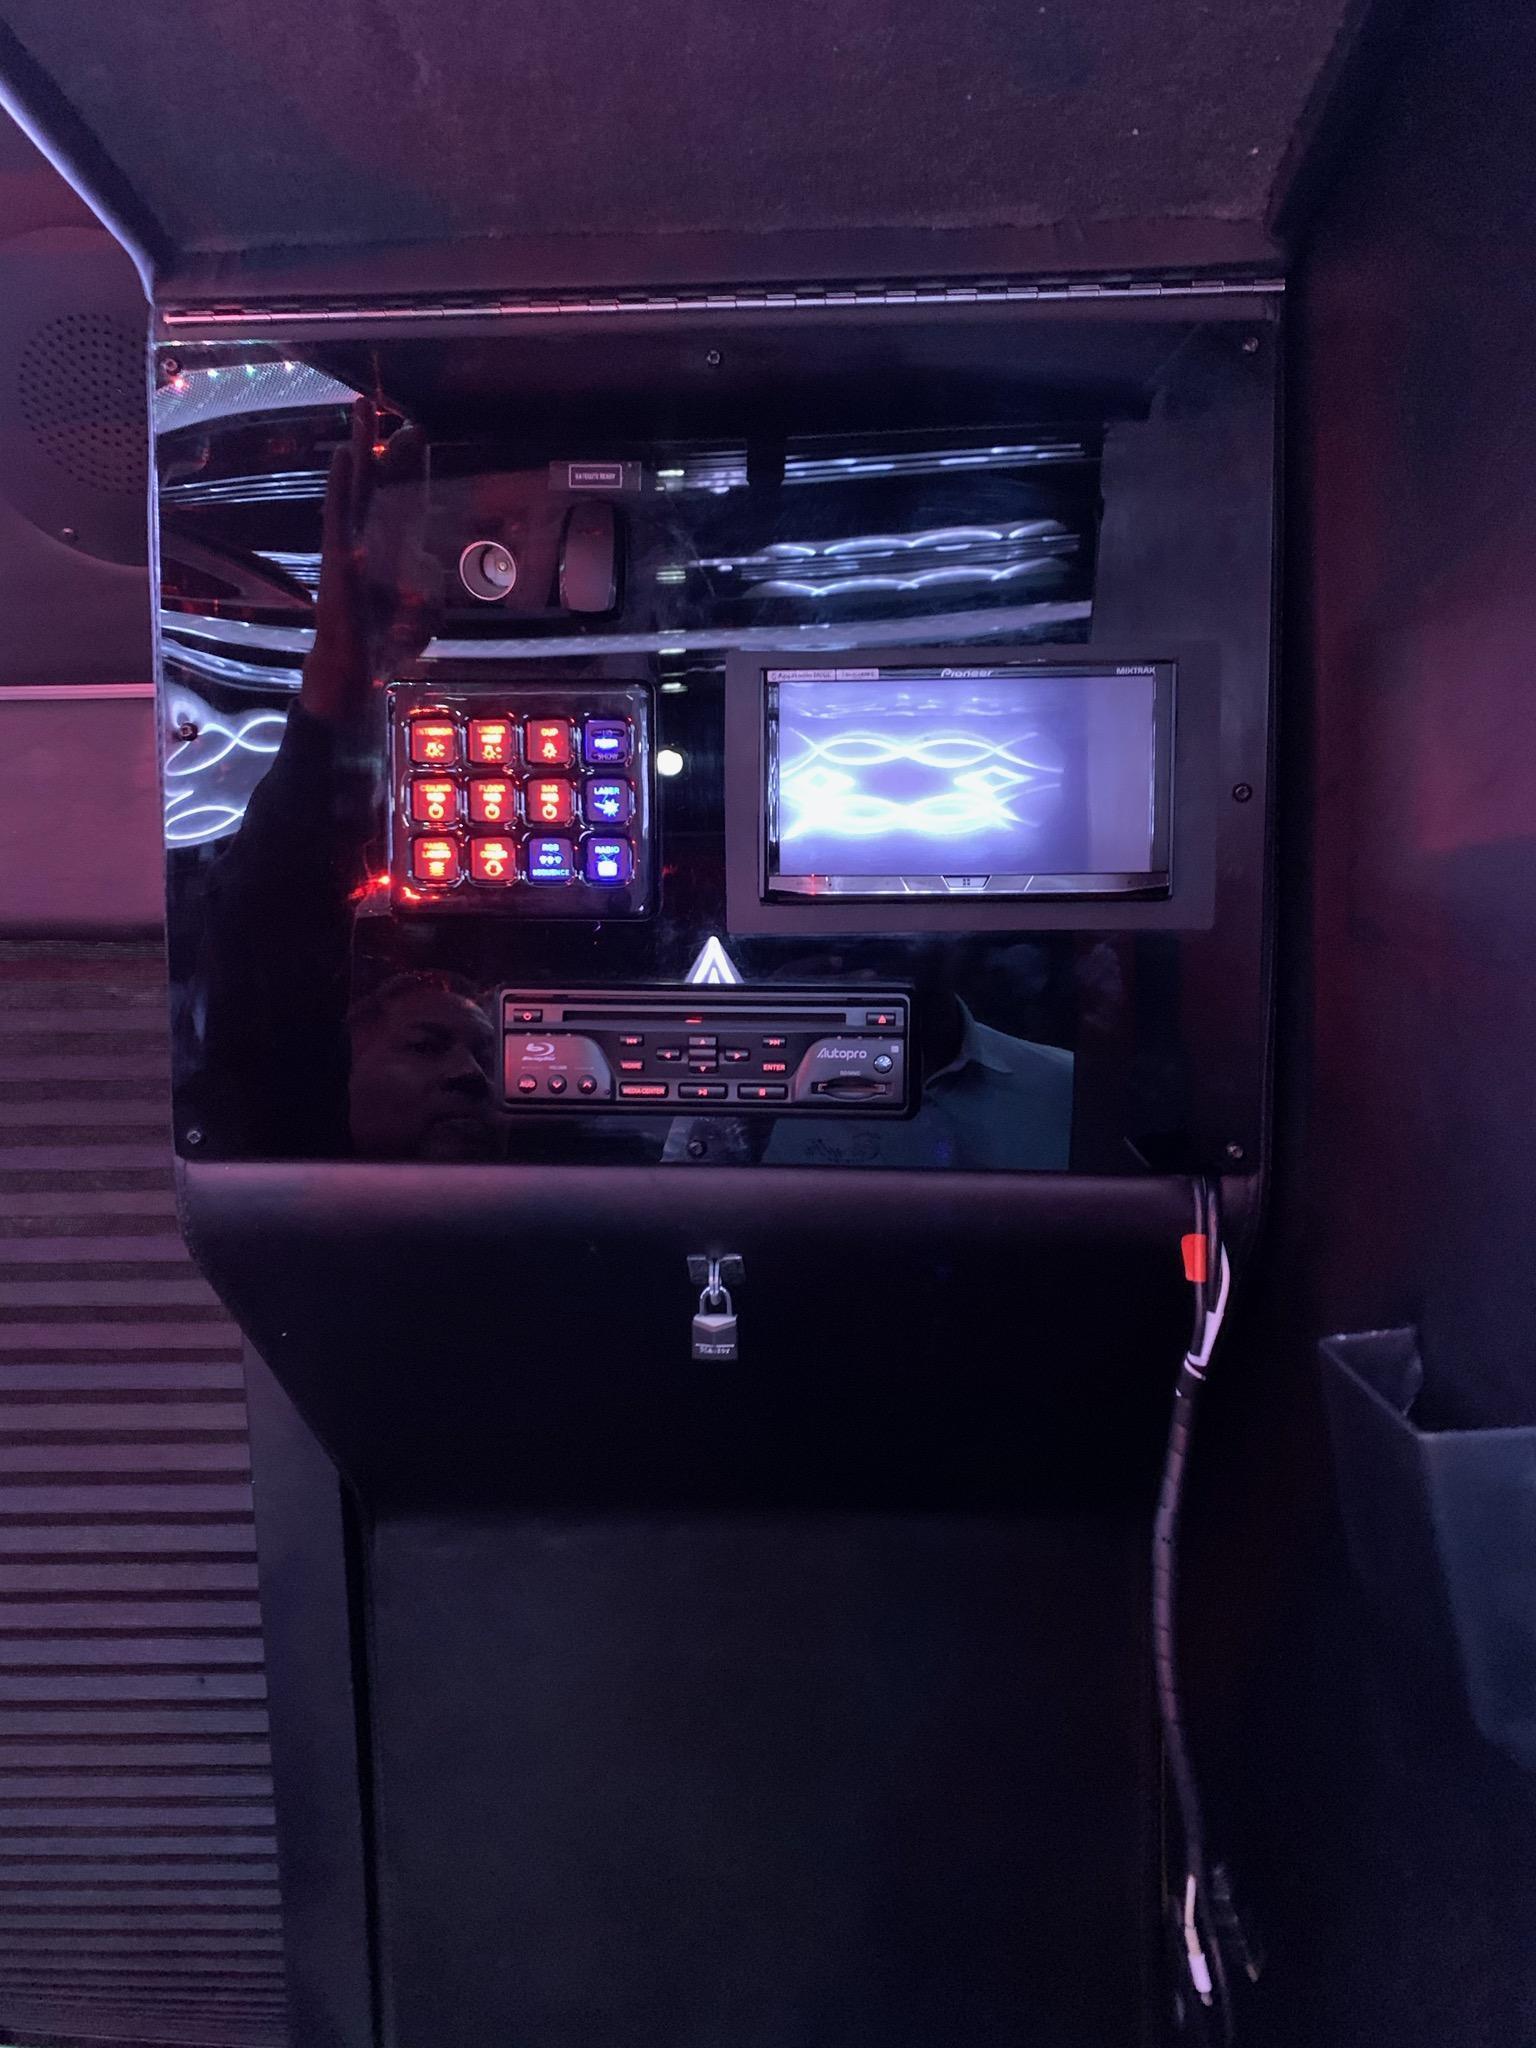 party bus interior music system and controls